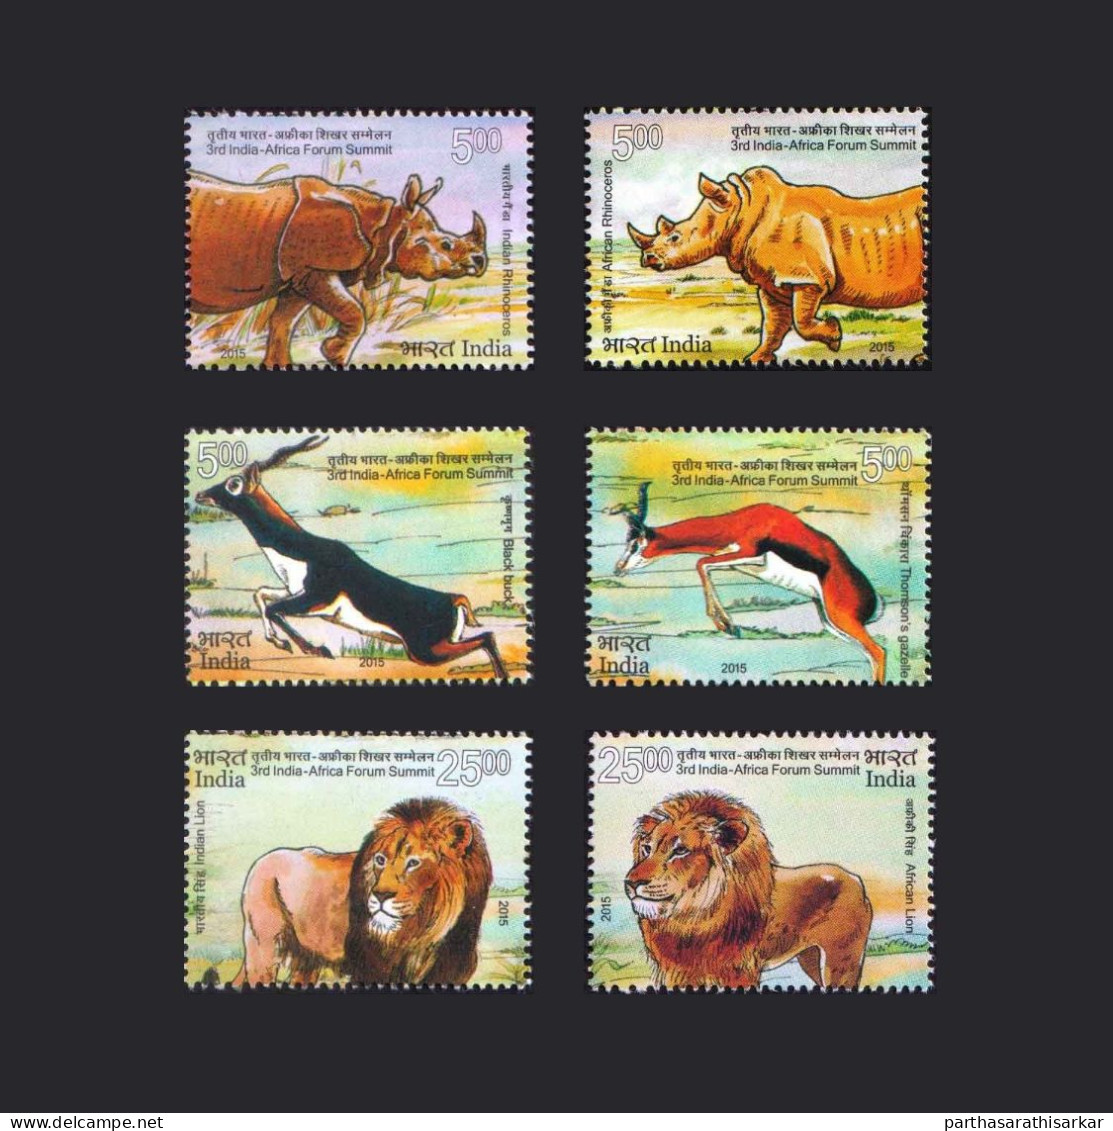 INDIA 2015 3RD INDIA-AFRICA FORUM SUMMIT FAUNA ANIMALS COMPLETE SET OF 6V STAMPS MNH - Nuovi